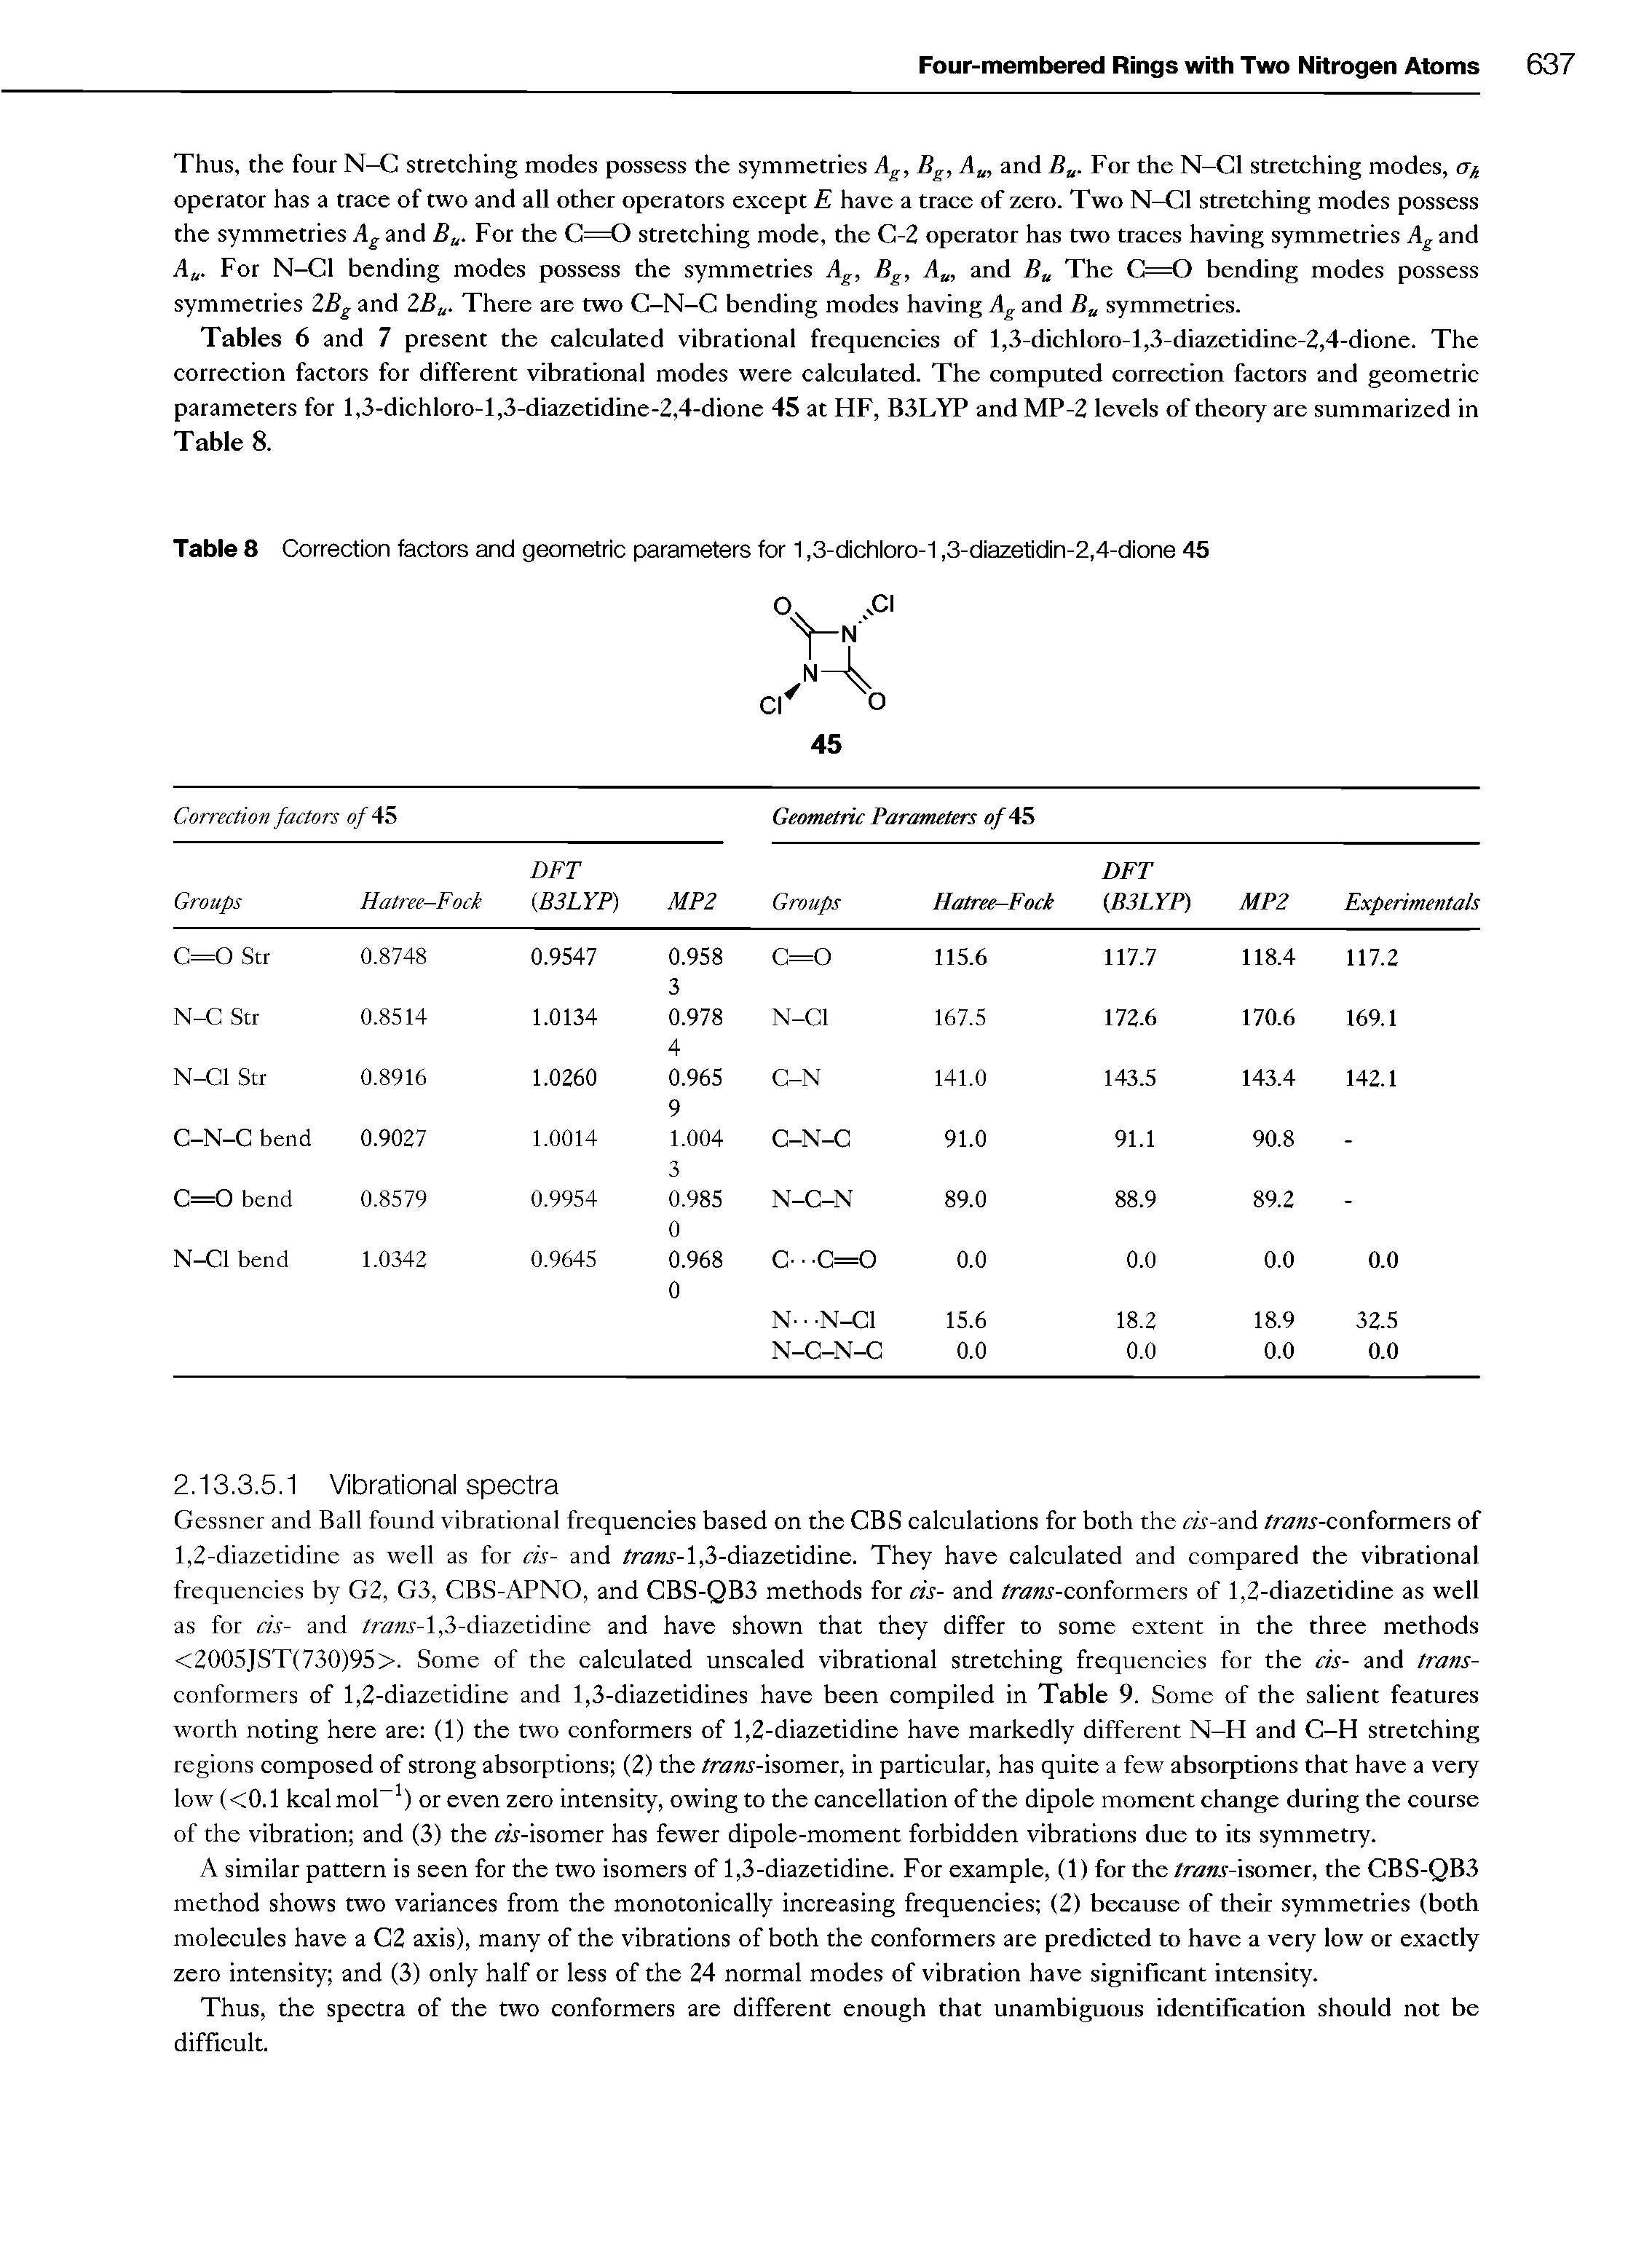 Tables 6 and 7 present the calculated vibrational frequencies of l,3-dichloro-l,3-diazetidine-2,4-dione. The correction factors for different vibrational modes were calculated. The computed correction factors and geometric parameters for l,3-dichloro-l,3-diazetidine-2,4-dione 45 at FIF, B3LYP and MP-2 levels of theory are summarized in Table 8.